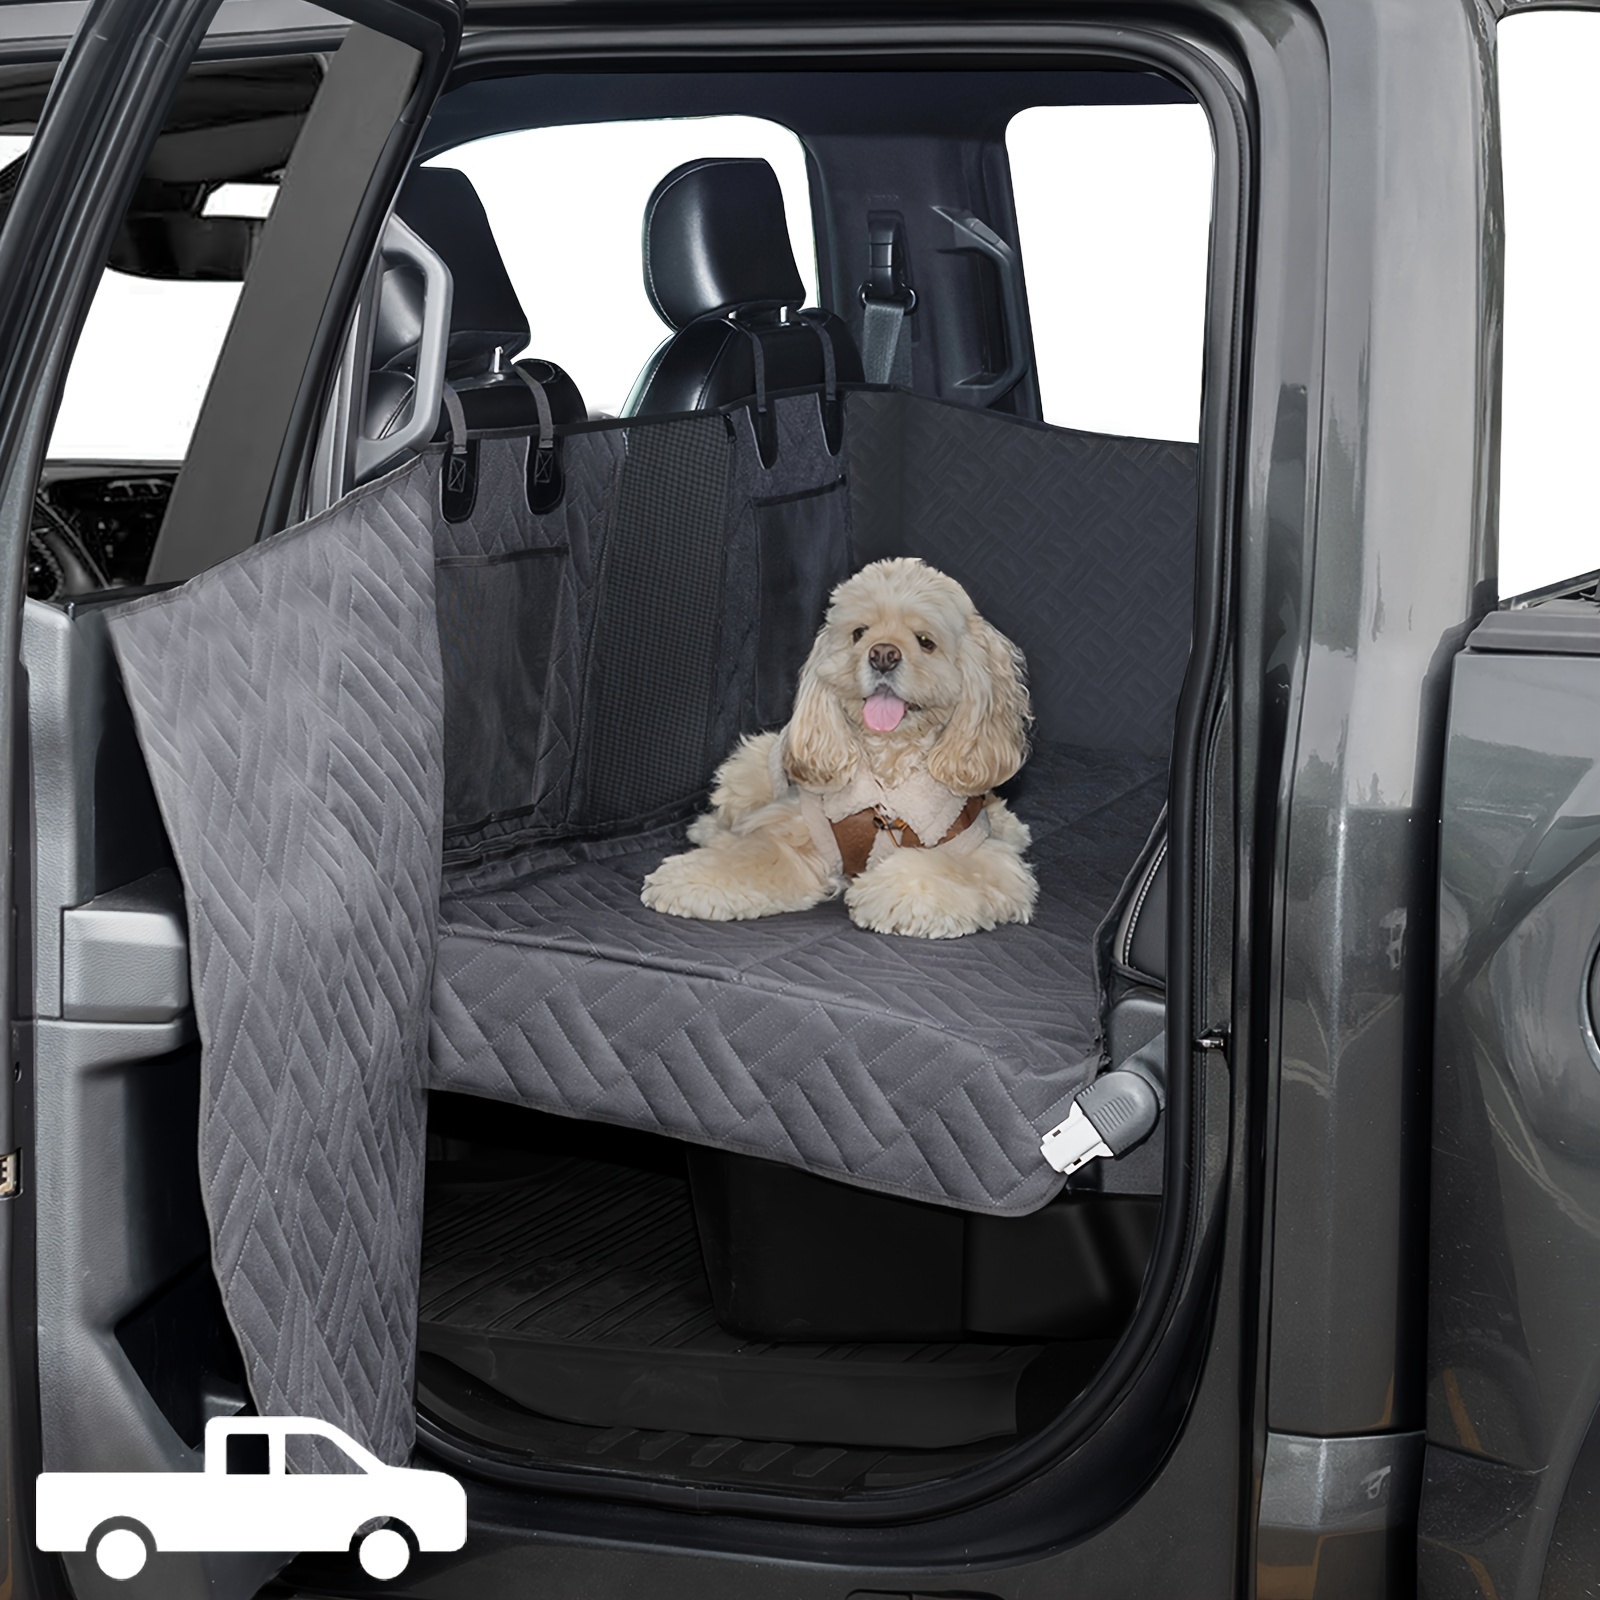 

Xl Dog Car Seat Cover For Trucks Dog Back Seat Extender And Bed With Strong Hard Bottom Pets Hammock For F150, Ram1500, Silverado 1500 Full Size Trucks With Storage Pockets (black)